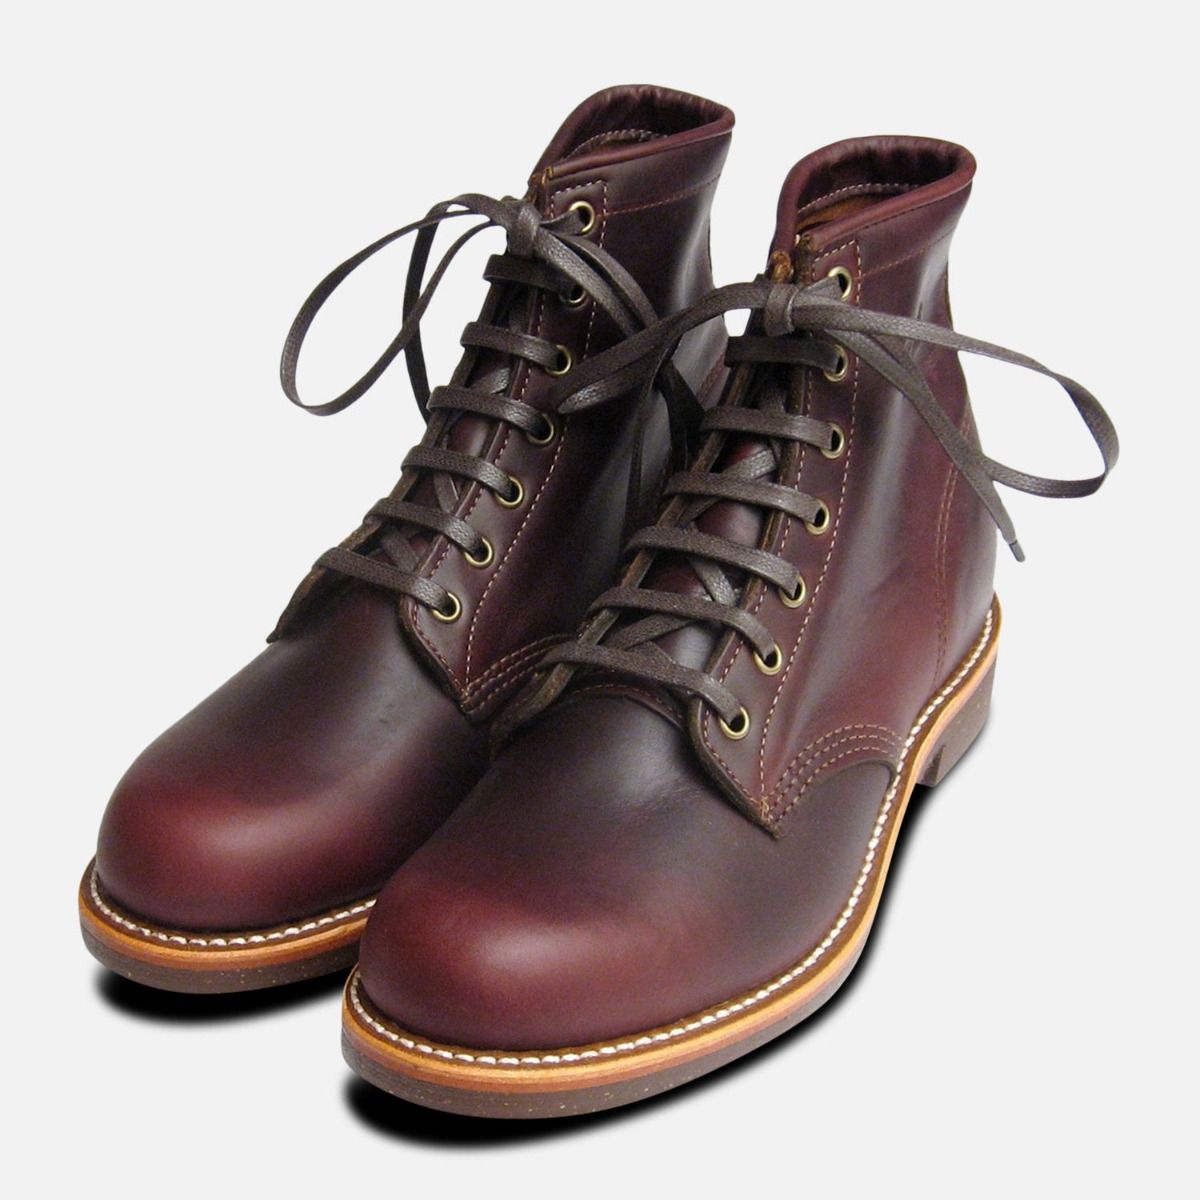 burgundy lace up boots